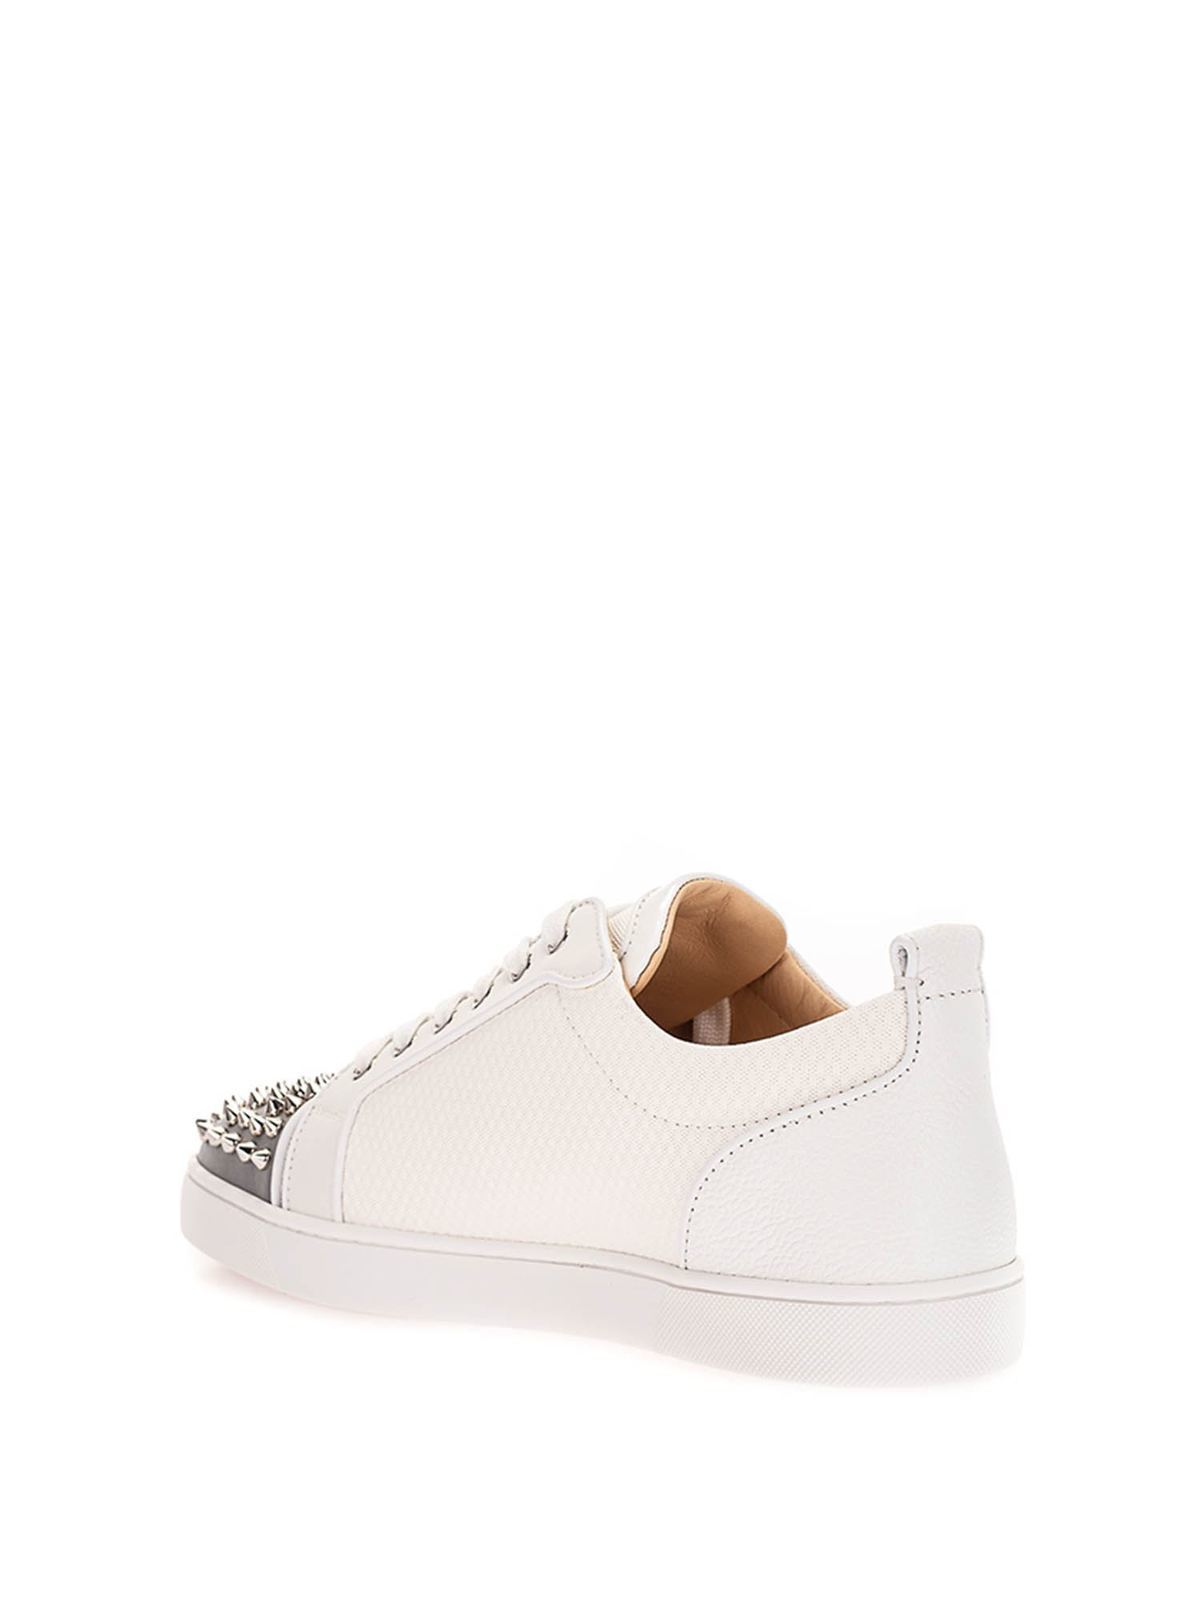 Trainers Christian Louboutin - Louis Junior Spike Orlando sneakers